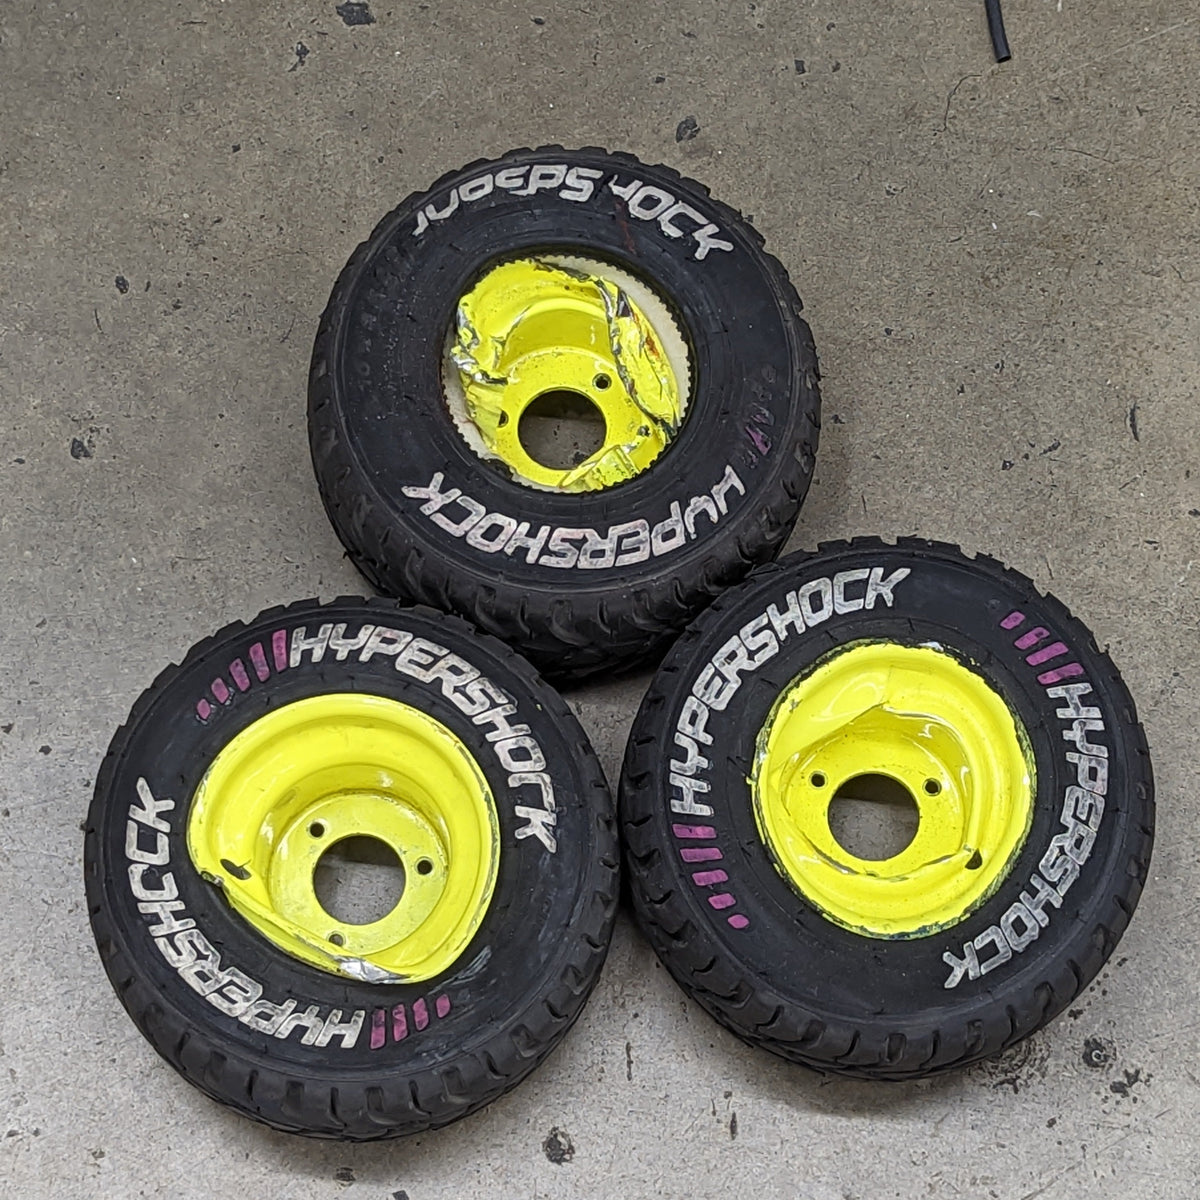 Wheels  HyperTires: Foam Filled and Ready for Action – Team HyperShock